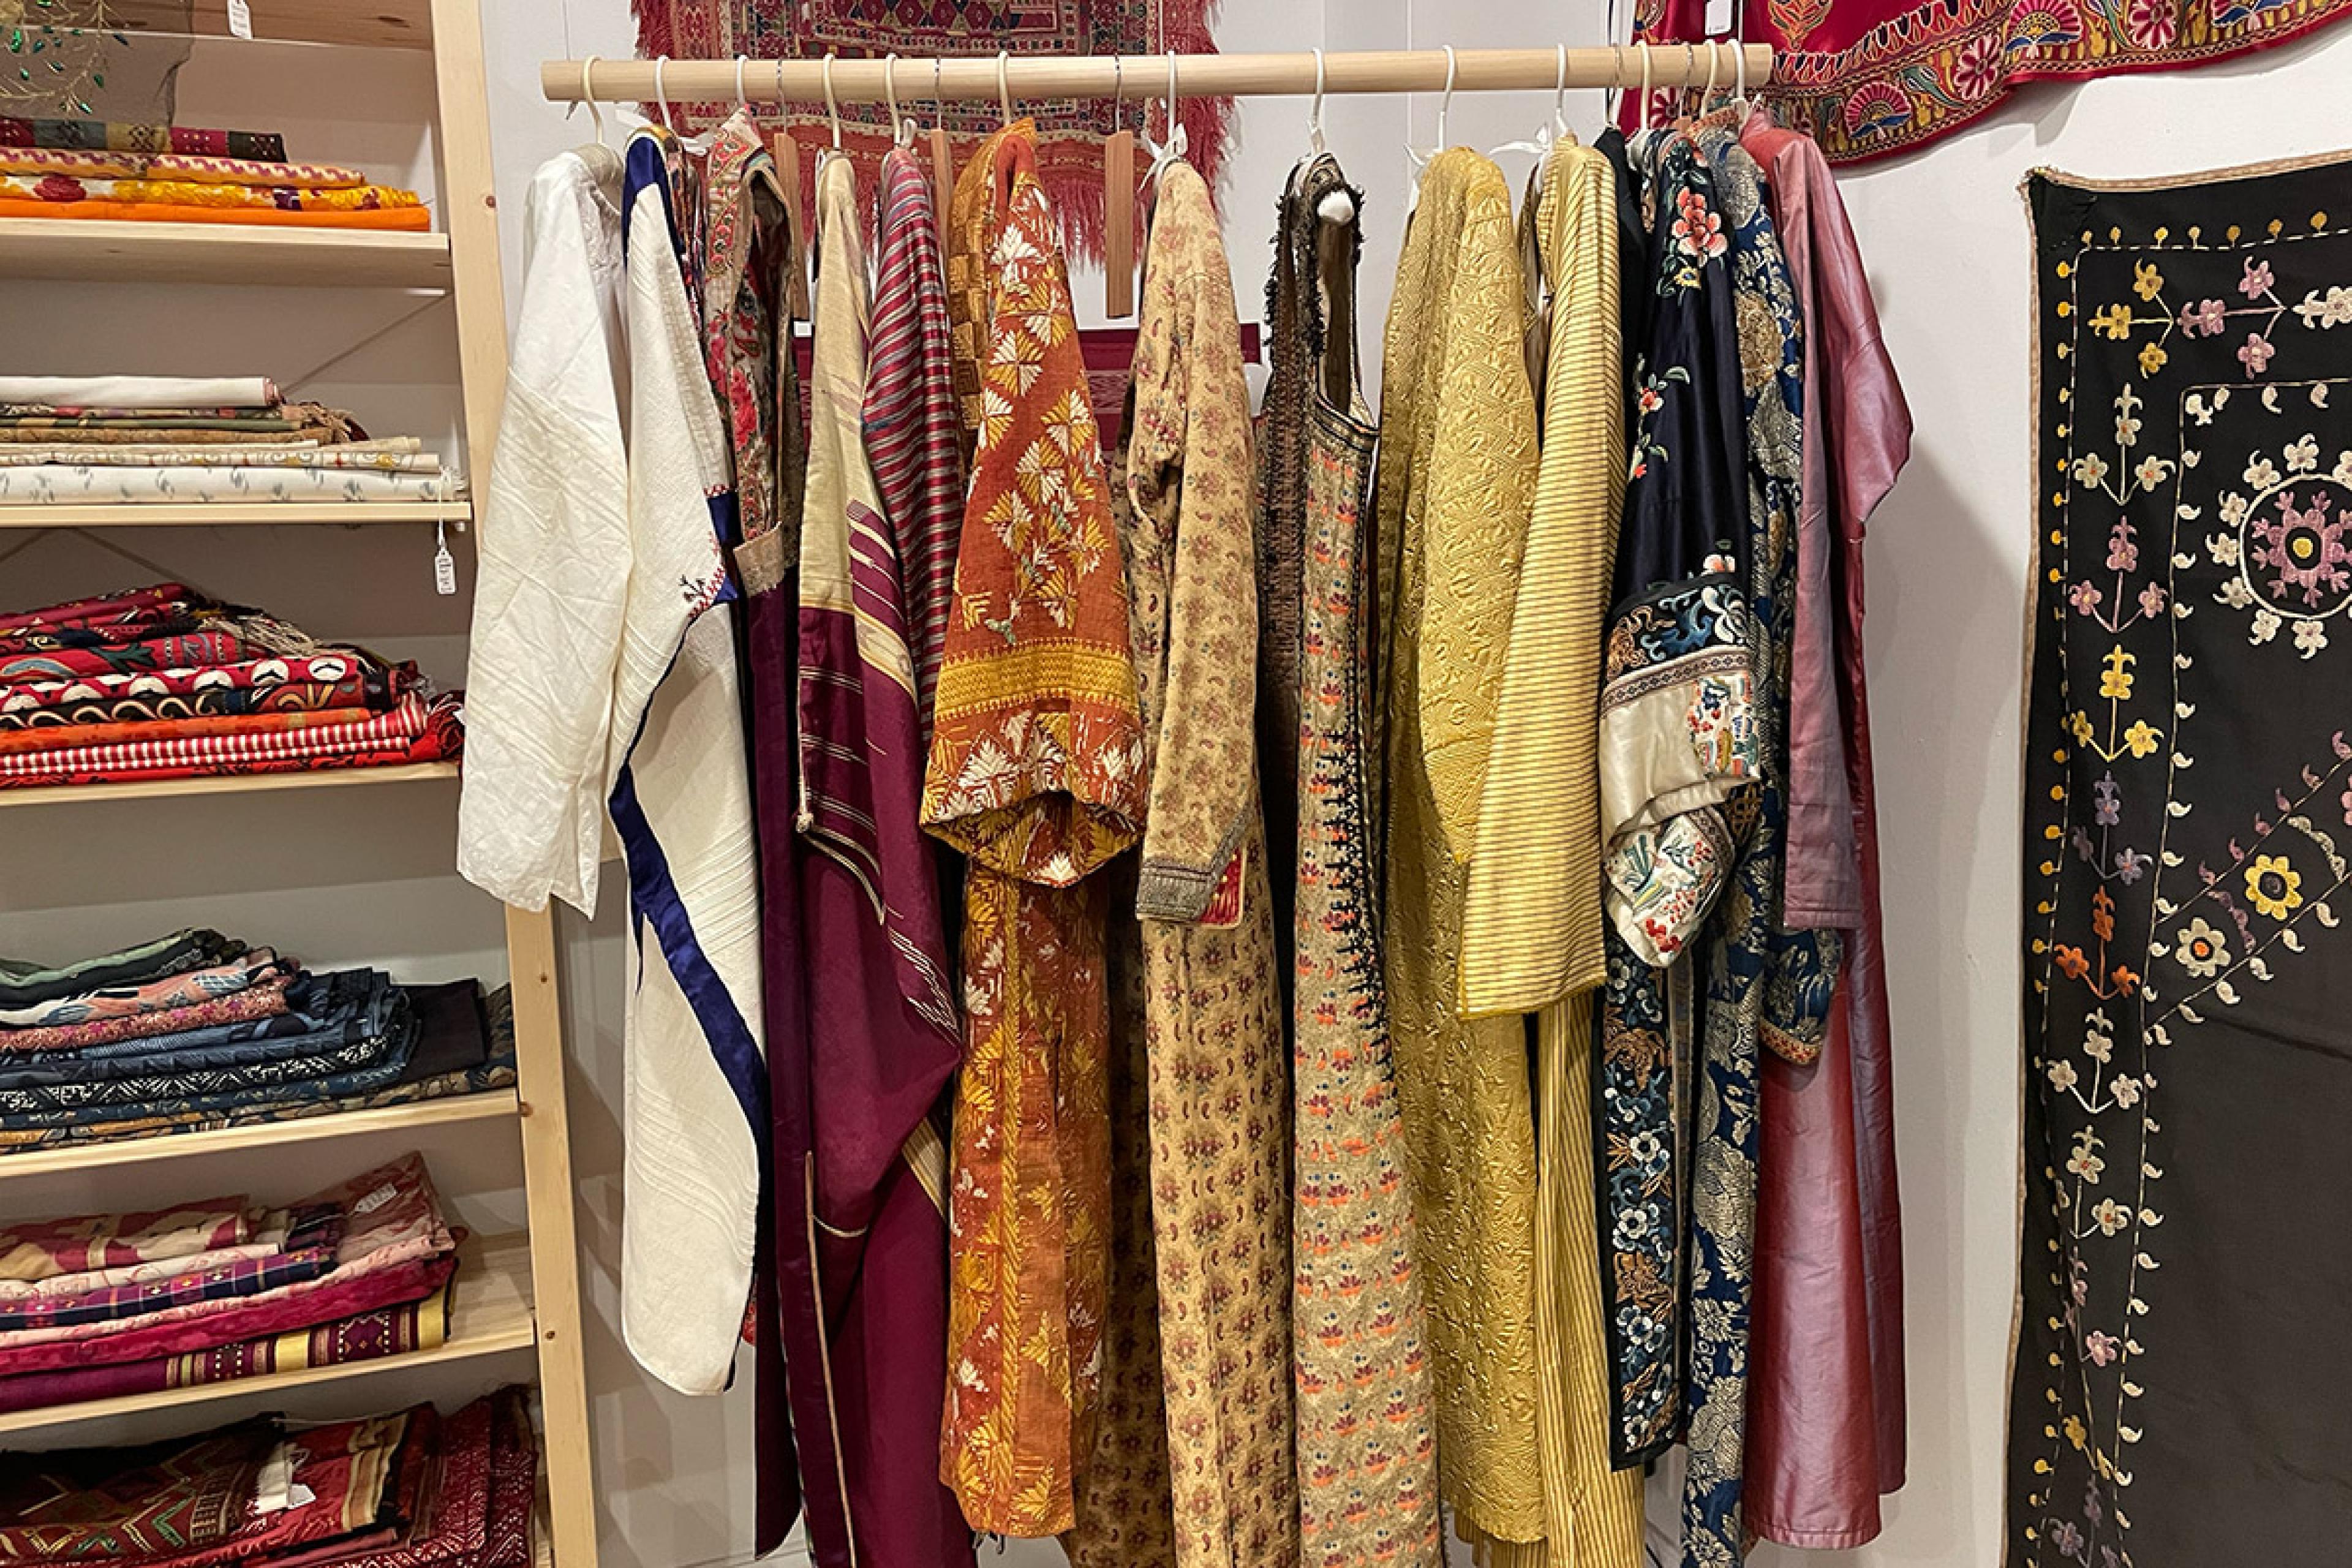 colorful textiles and women's clothing hanging on rack in store